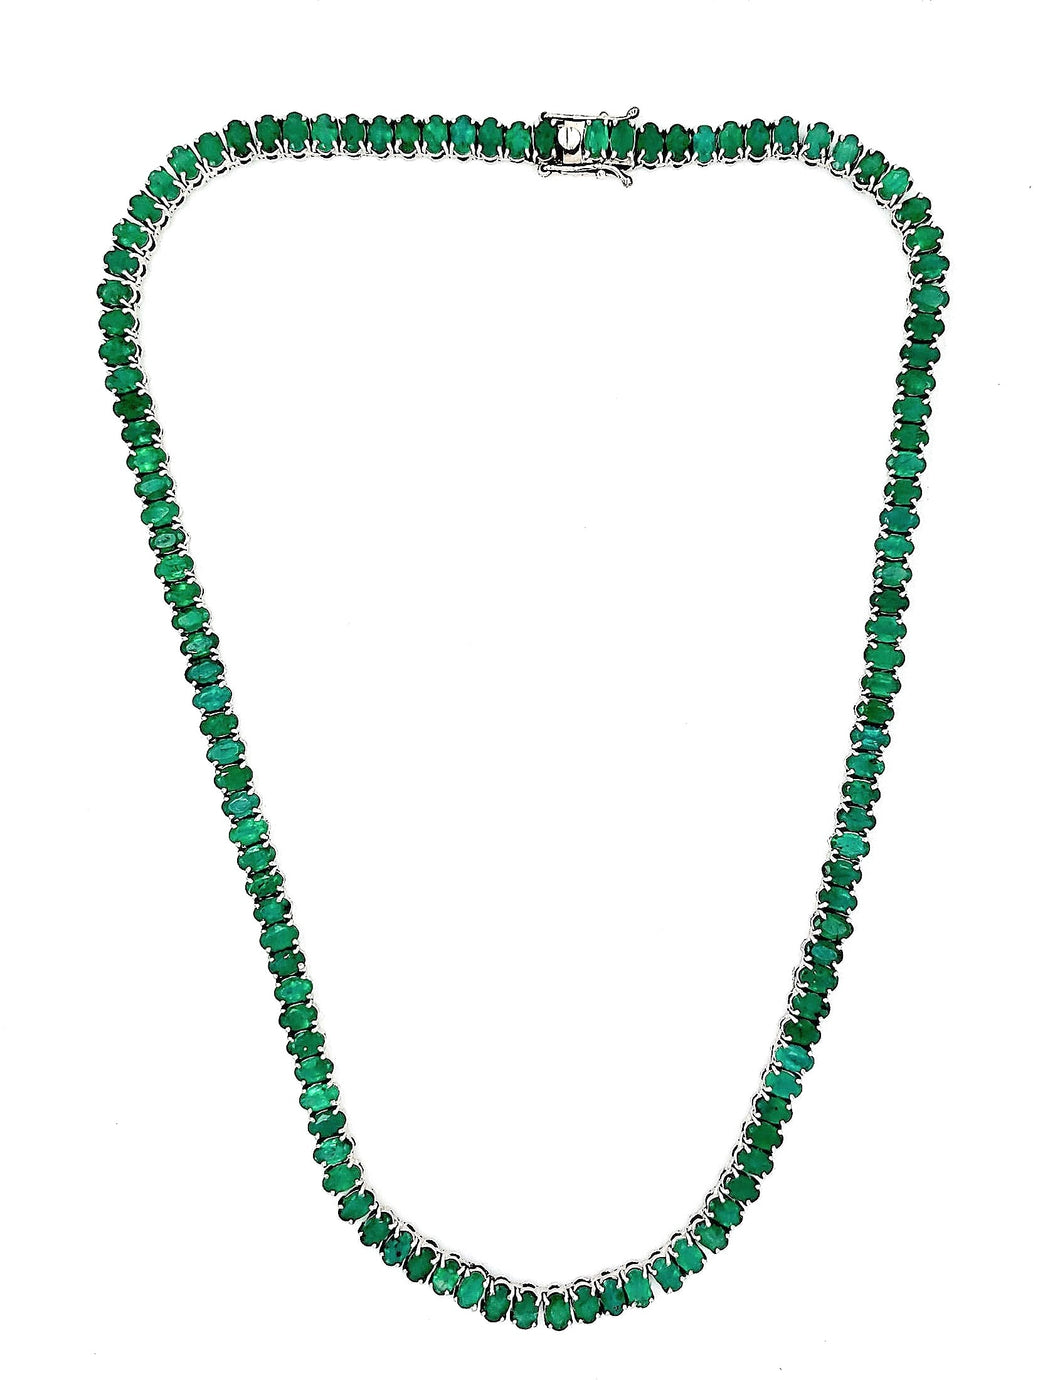 25 Ct Oval cut Emerald Tennis Necklace in 14K gold